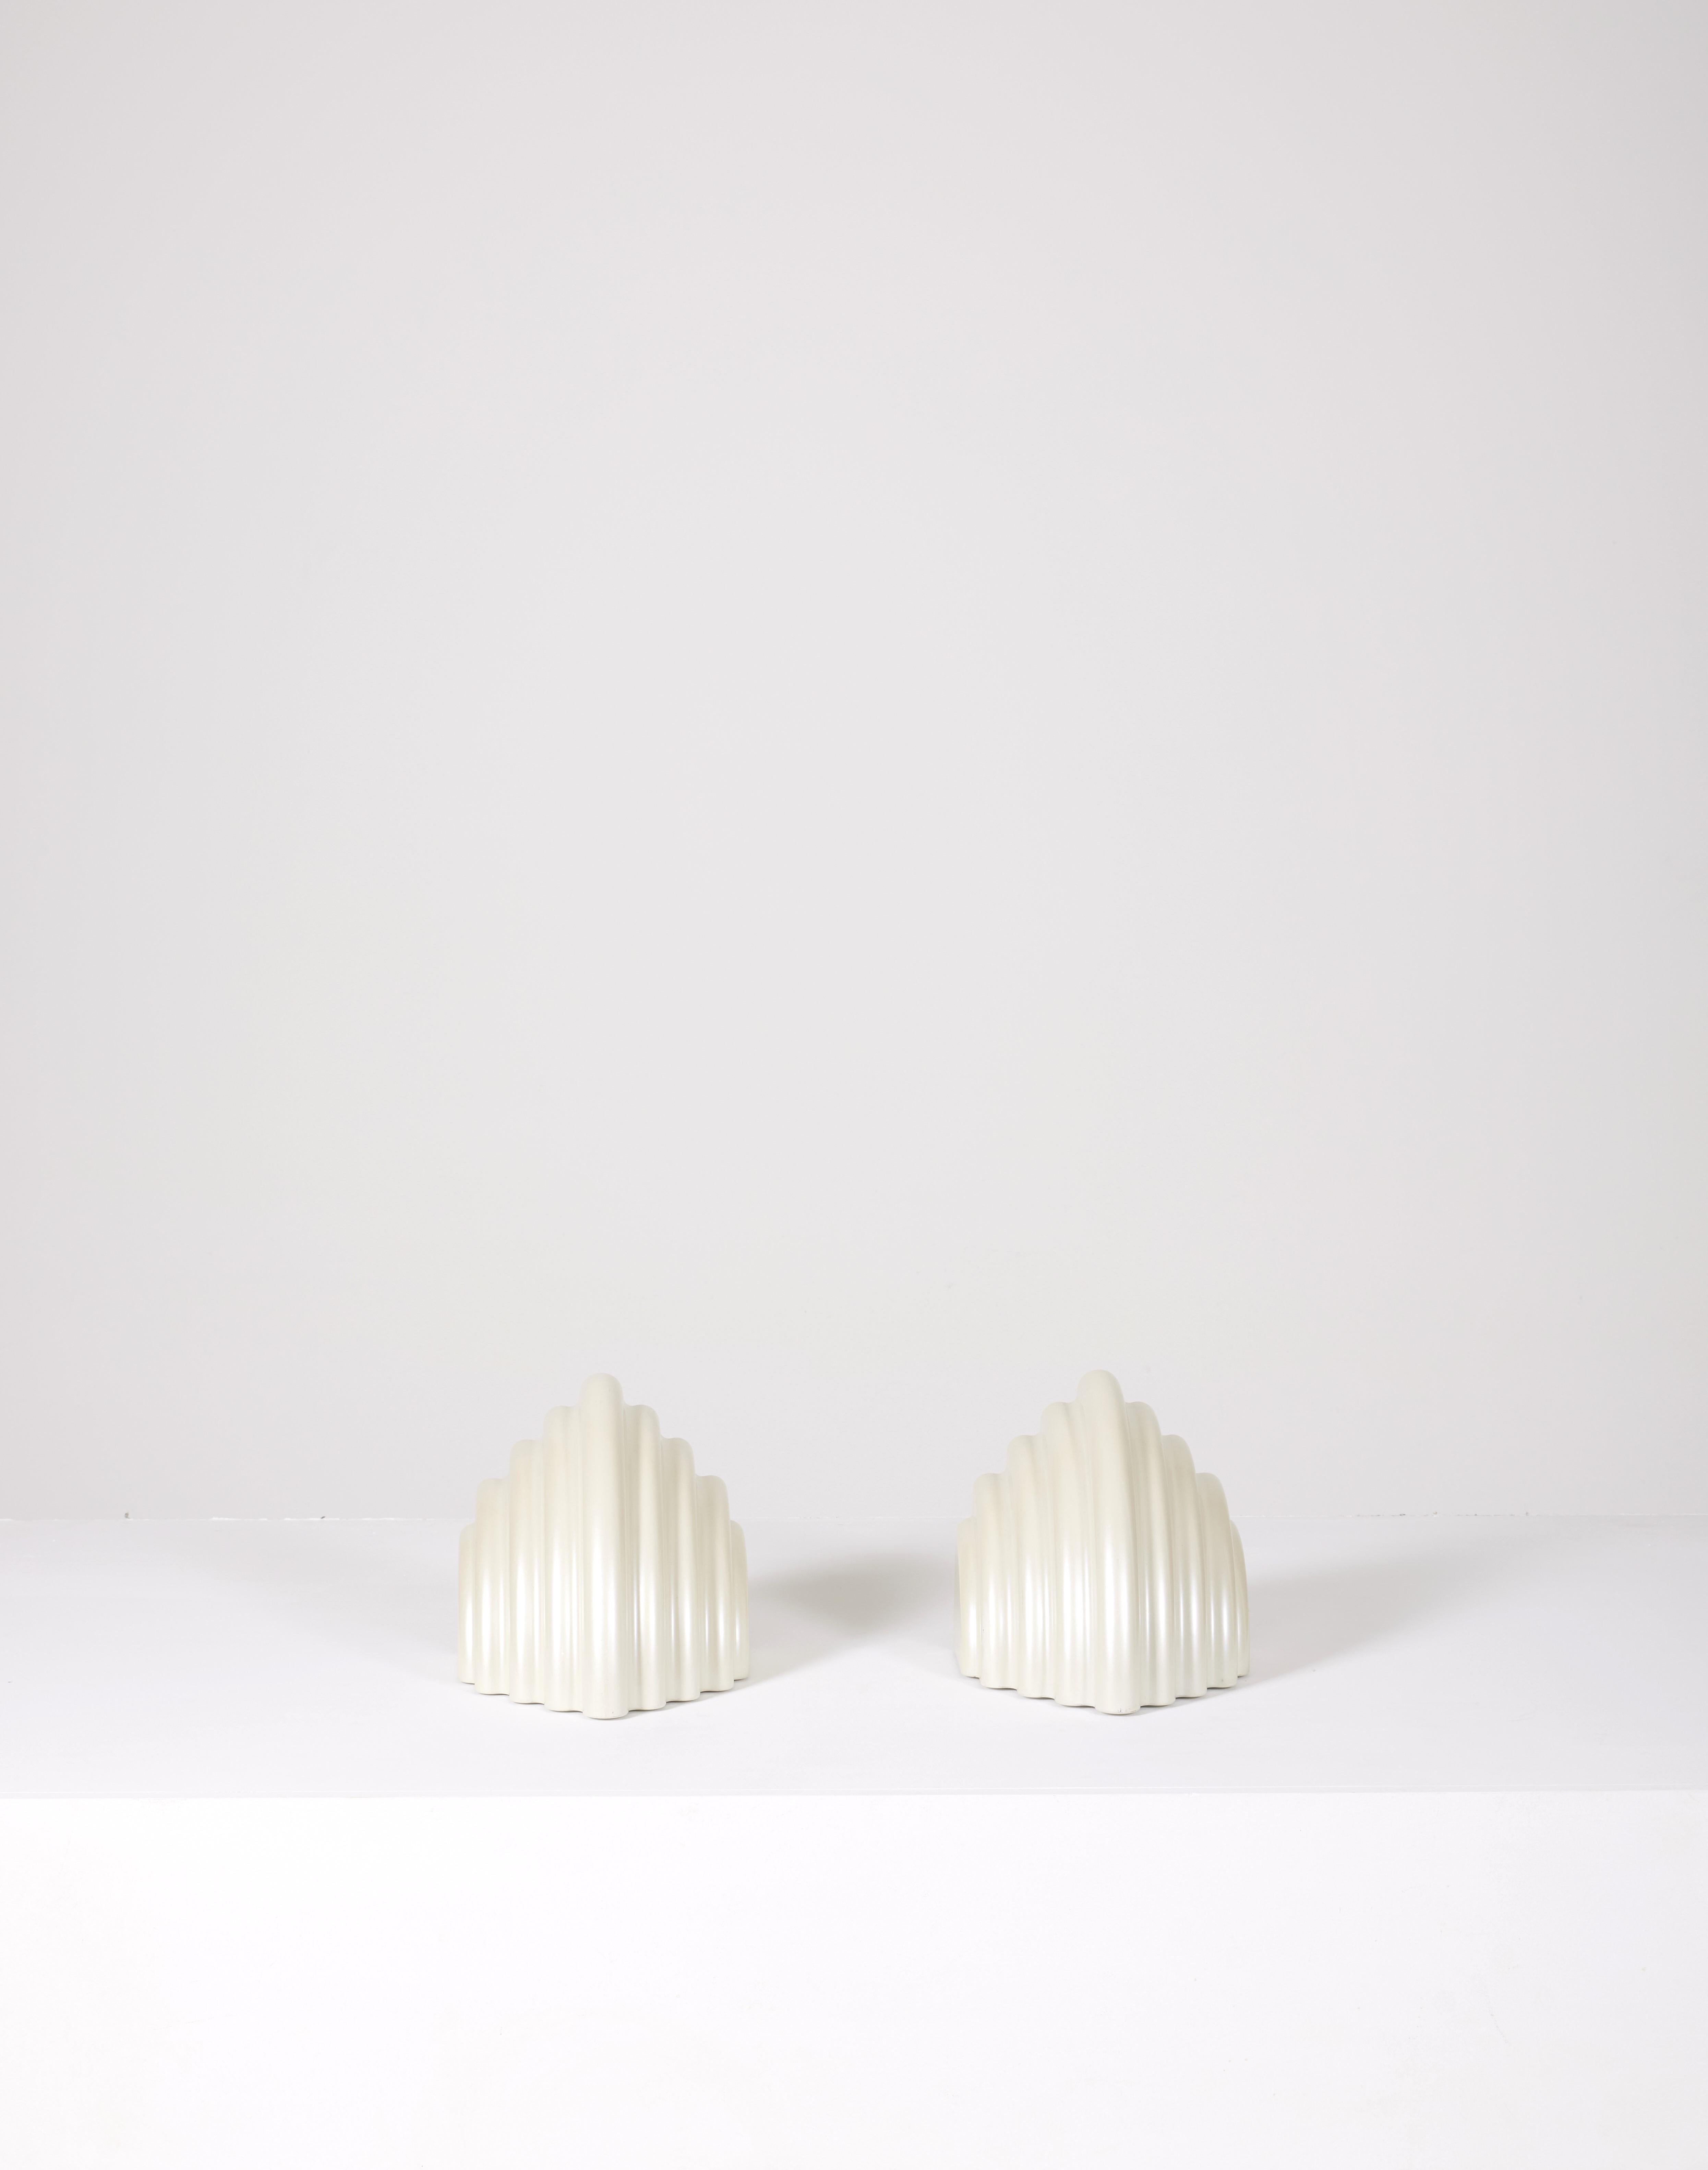 Pair of white Sconces by Kazuhide Takahama  For Sale 4